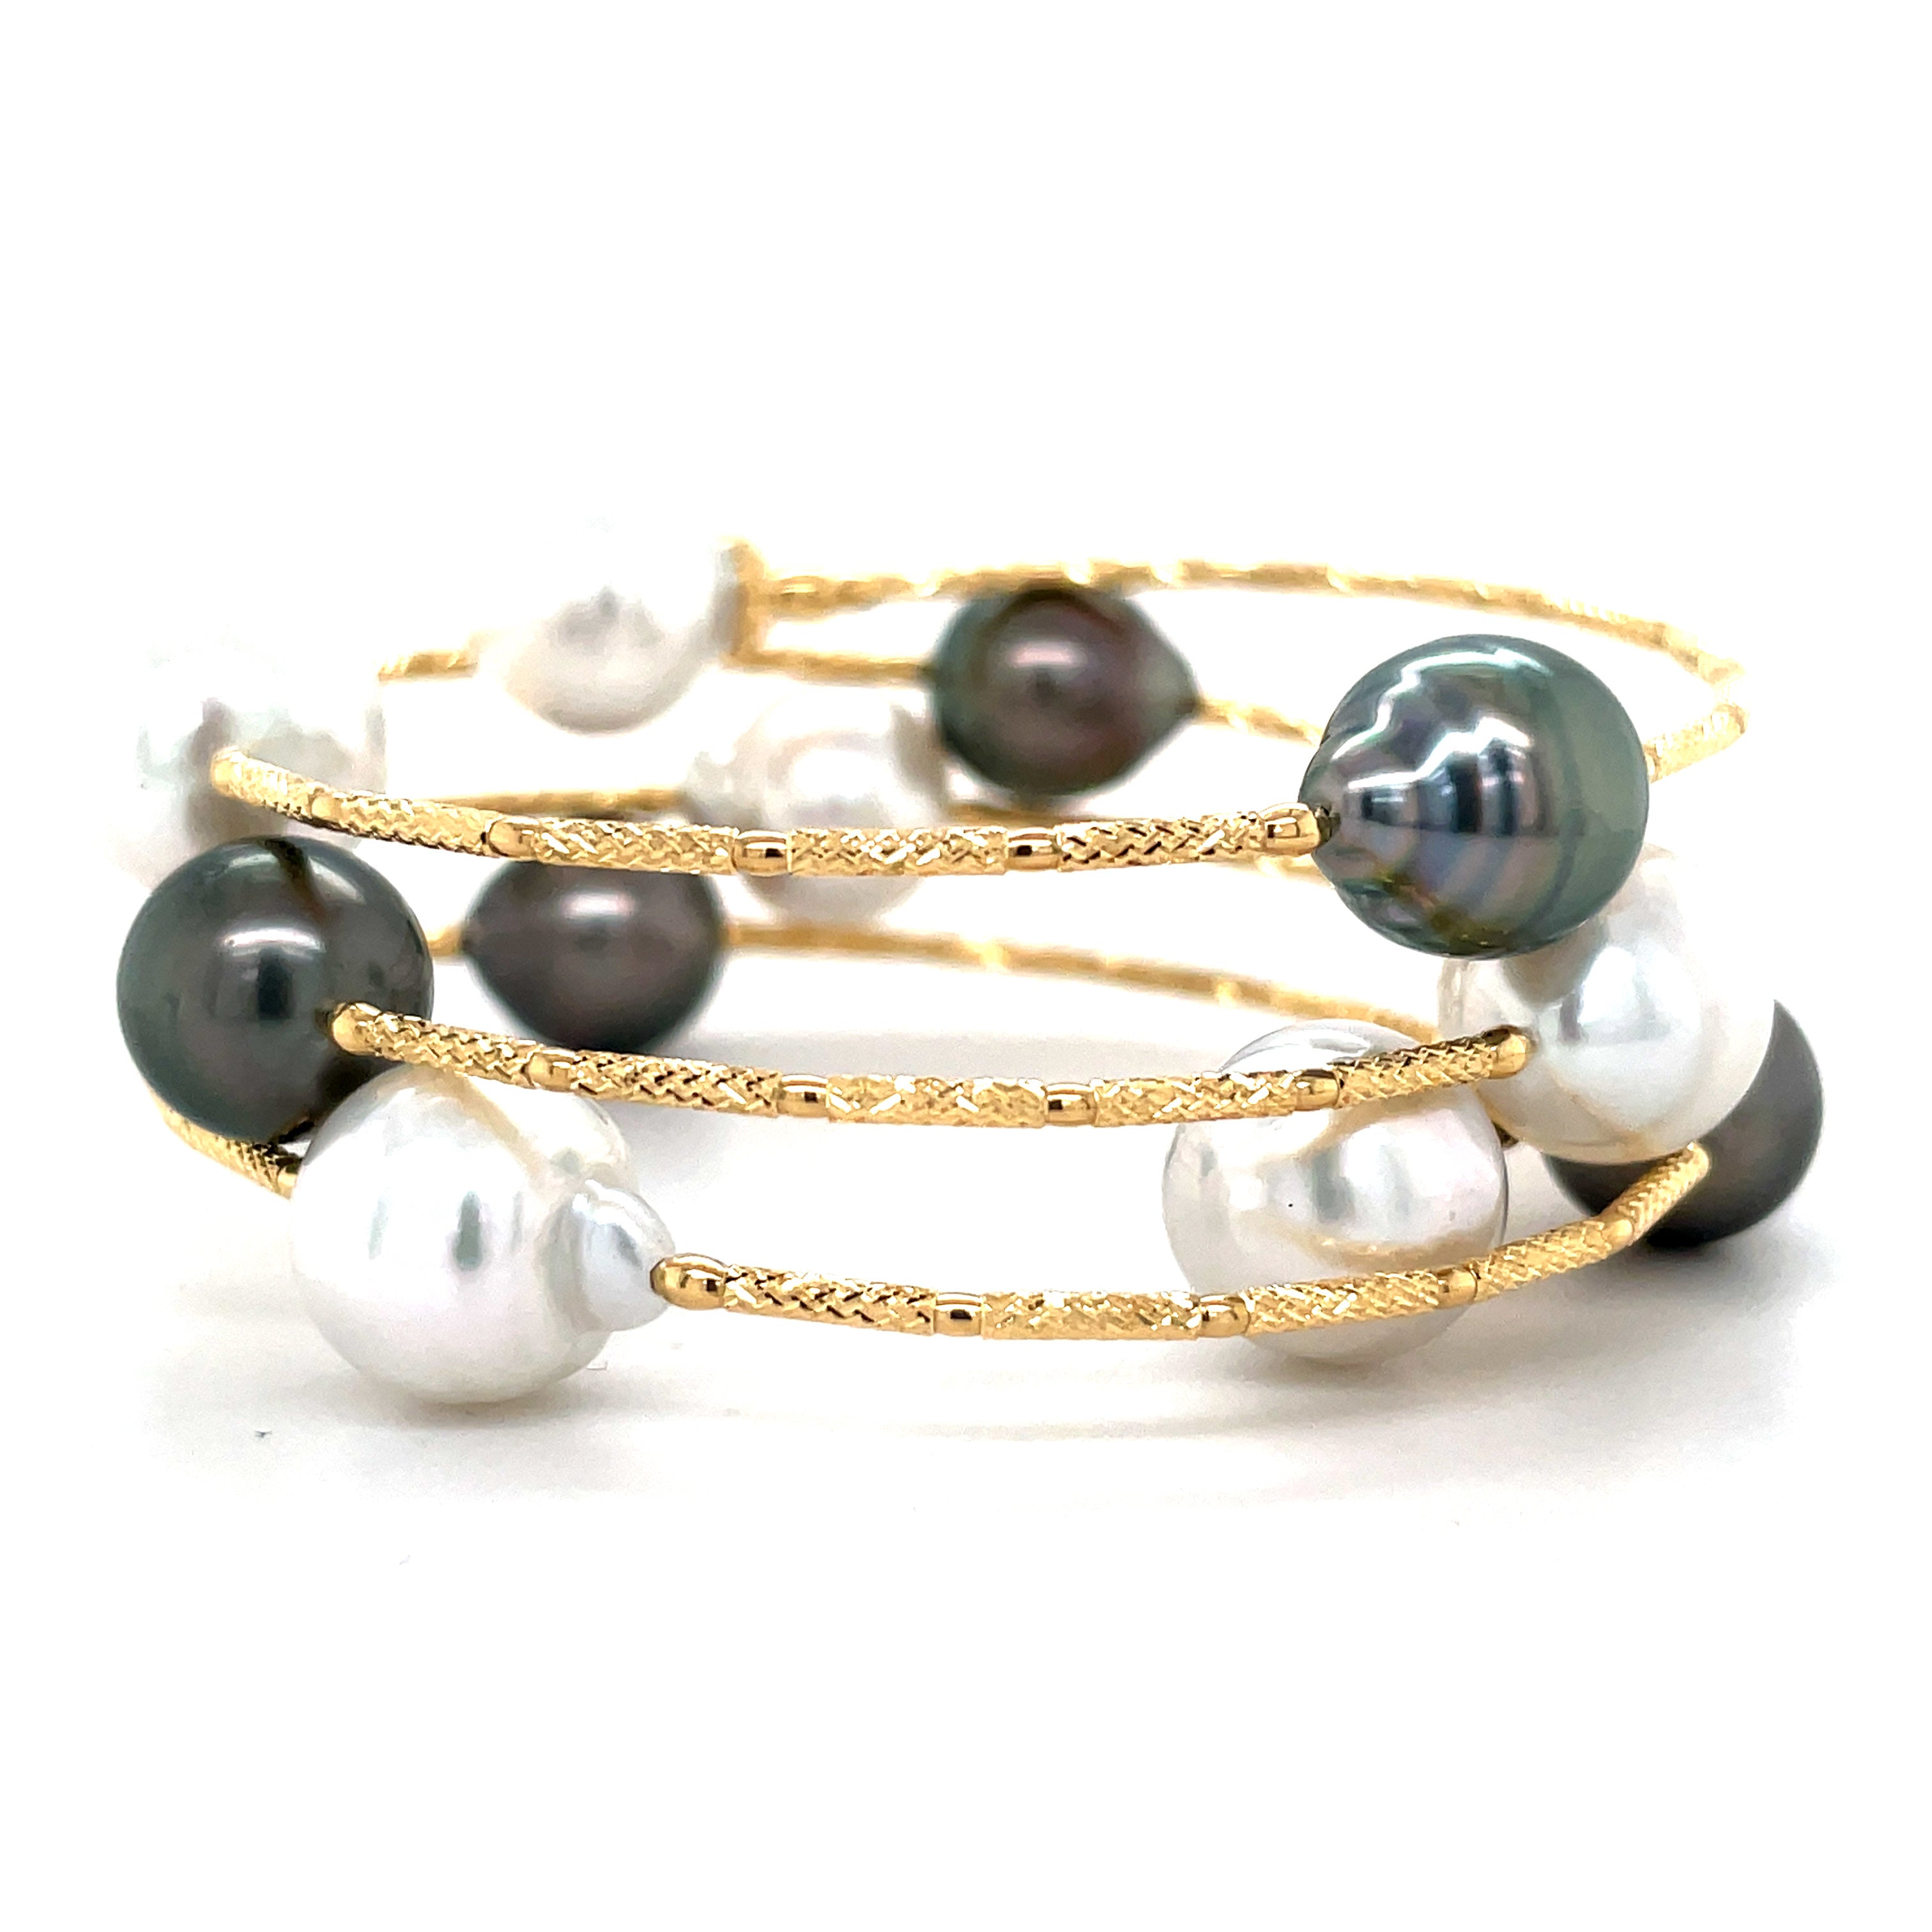 Wrap around bracelet  5 Tahitian pearls   5 South seas pearls  18k yellow gold coil  9.50 mm -11.00 mm  Easy wear & stack 